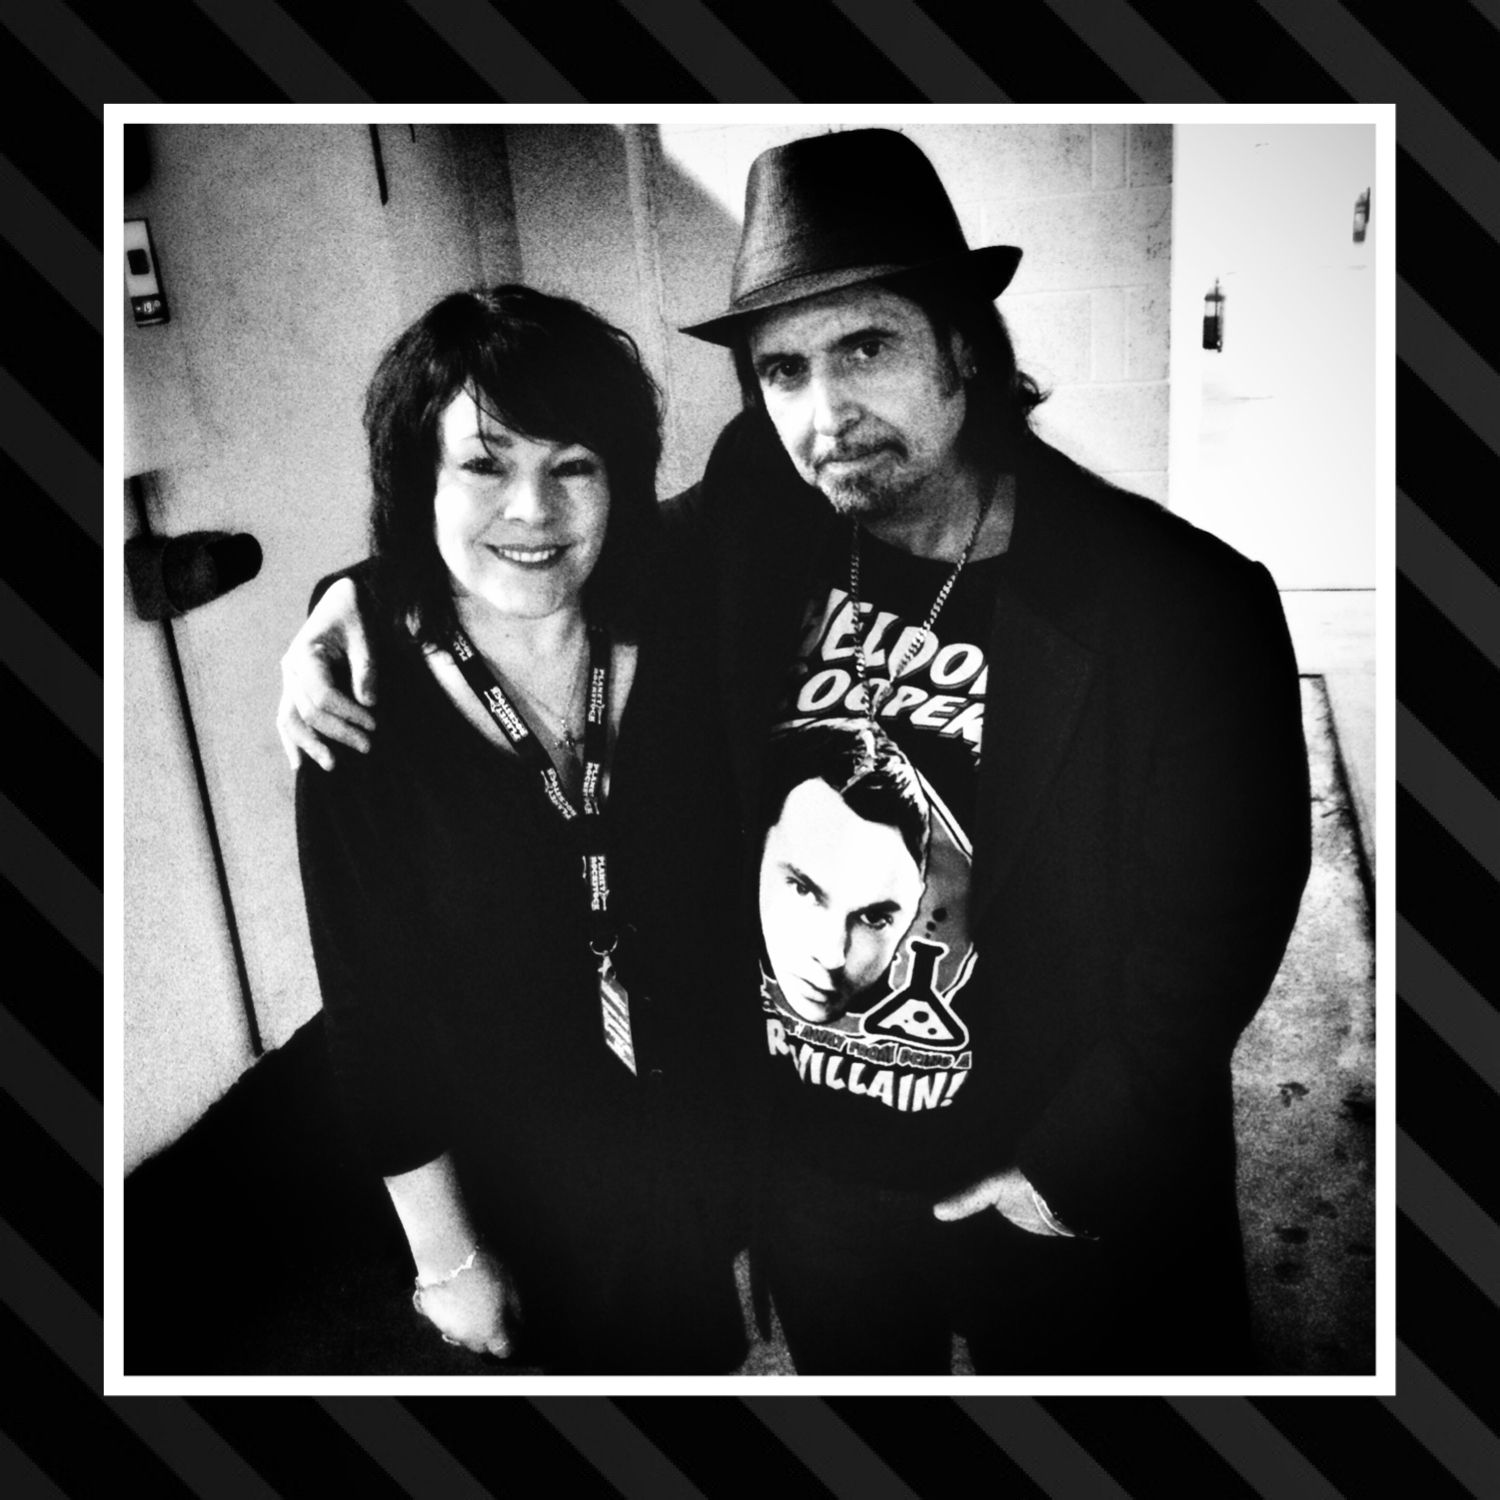 54: The one with Motörhead’s Phil Campbell